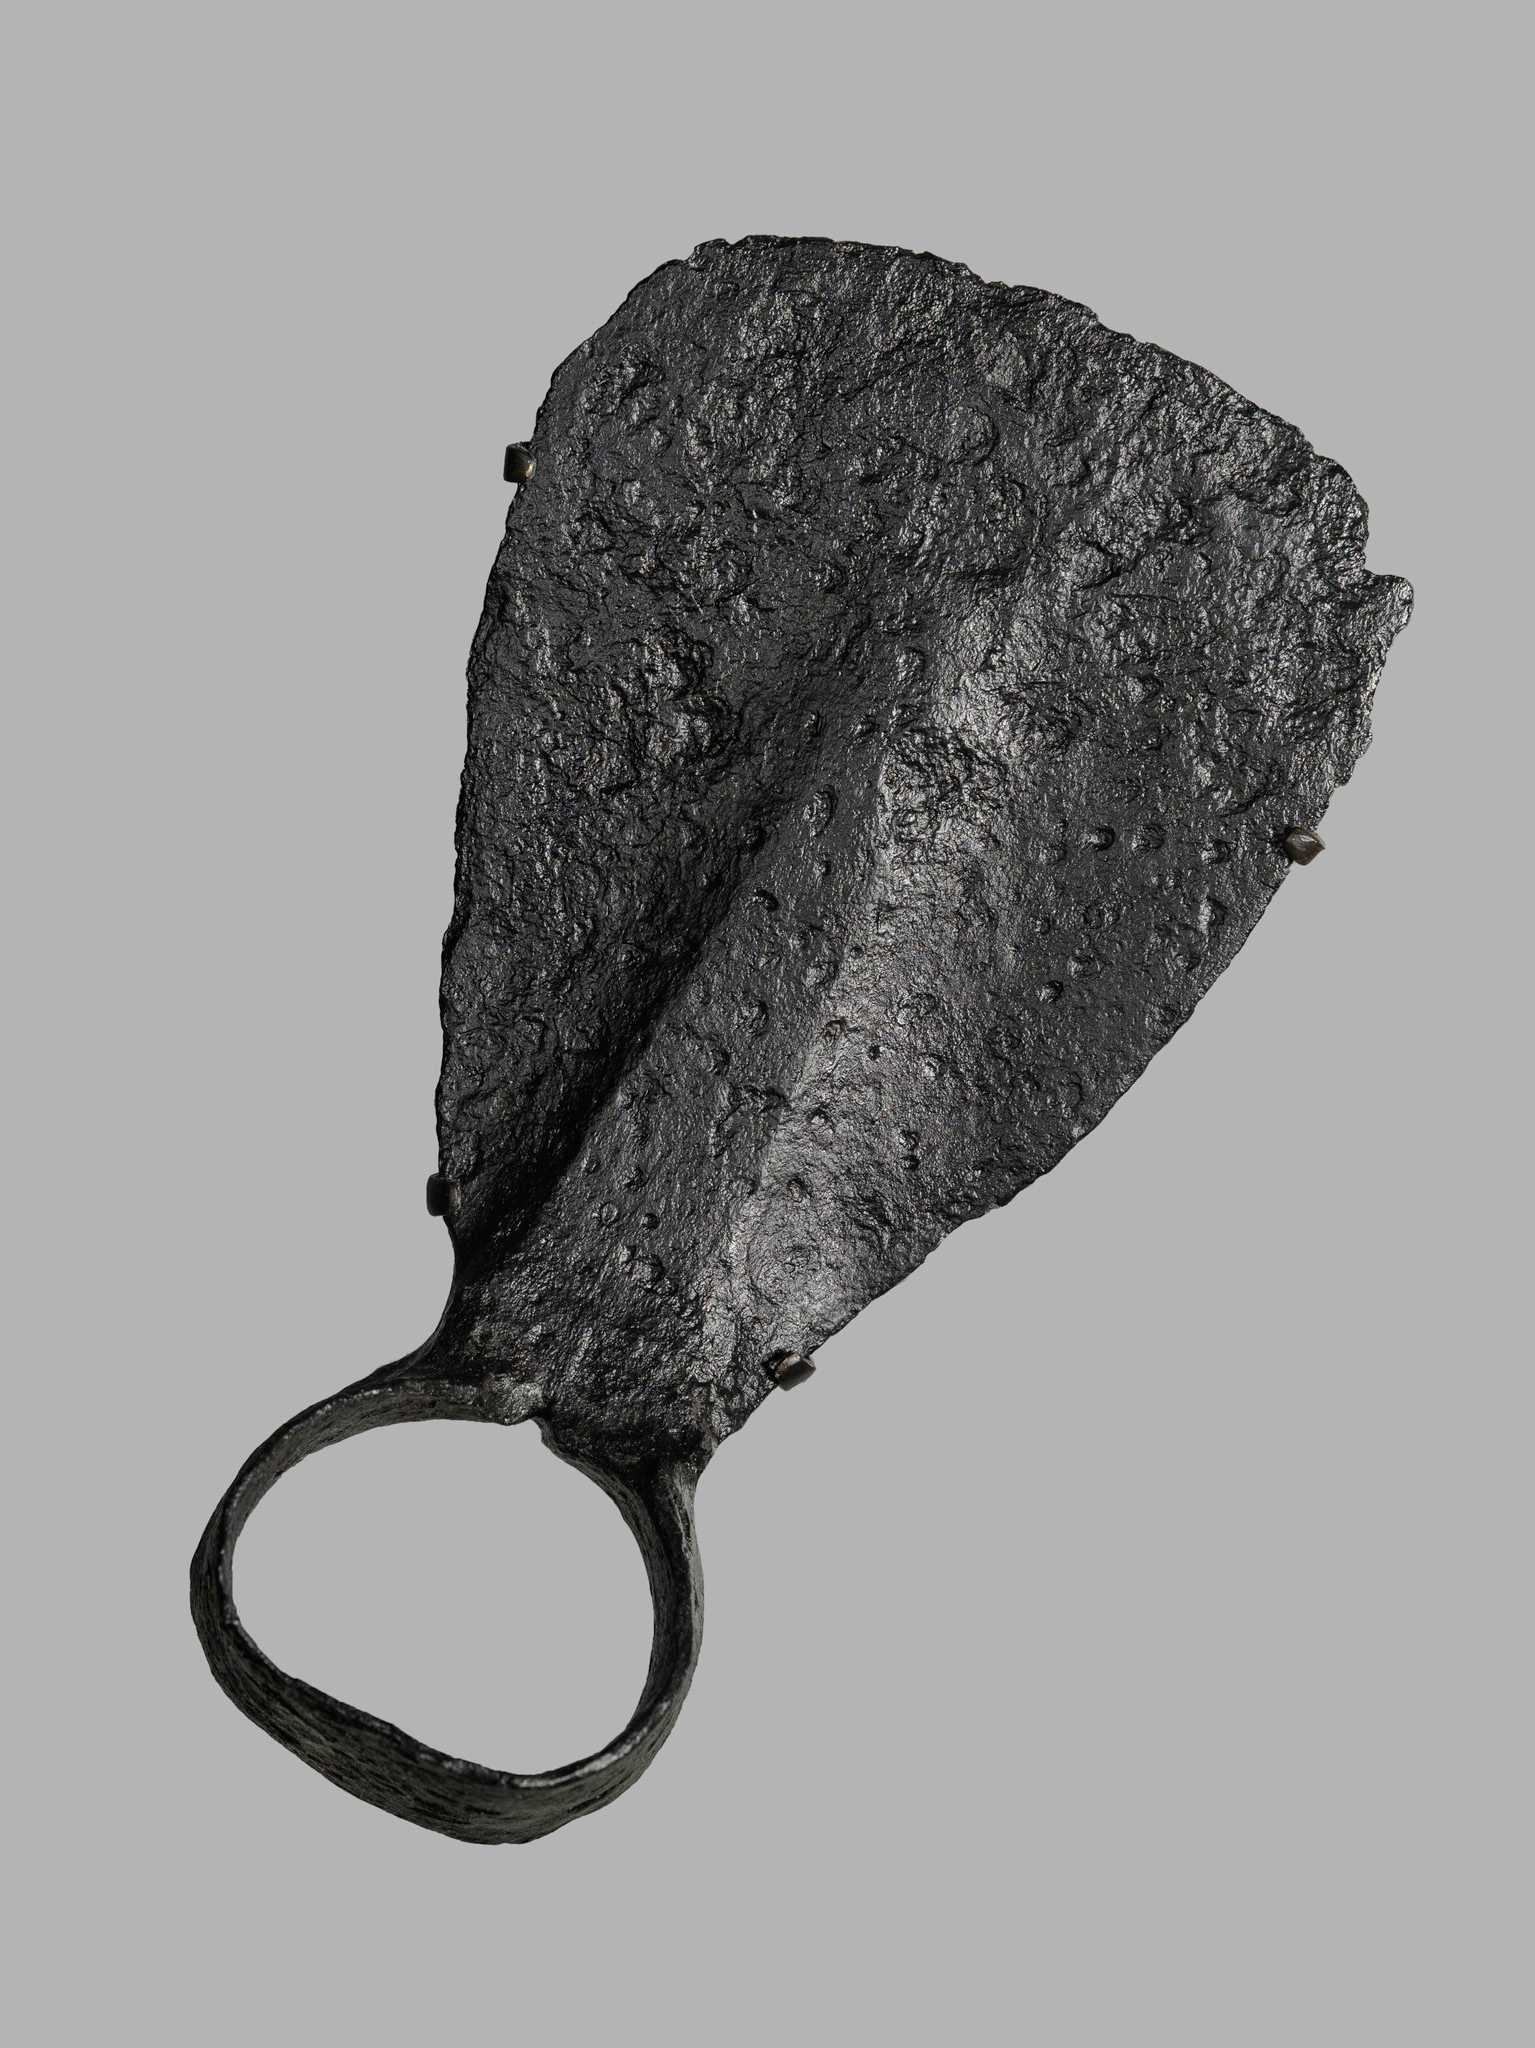 Photograph of a hoe blade